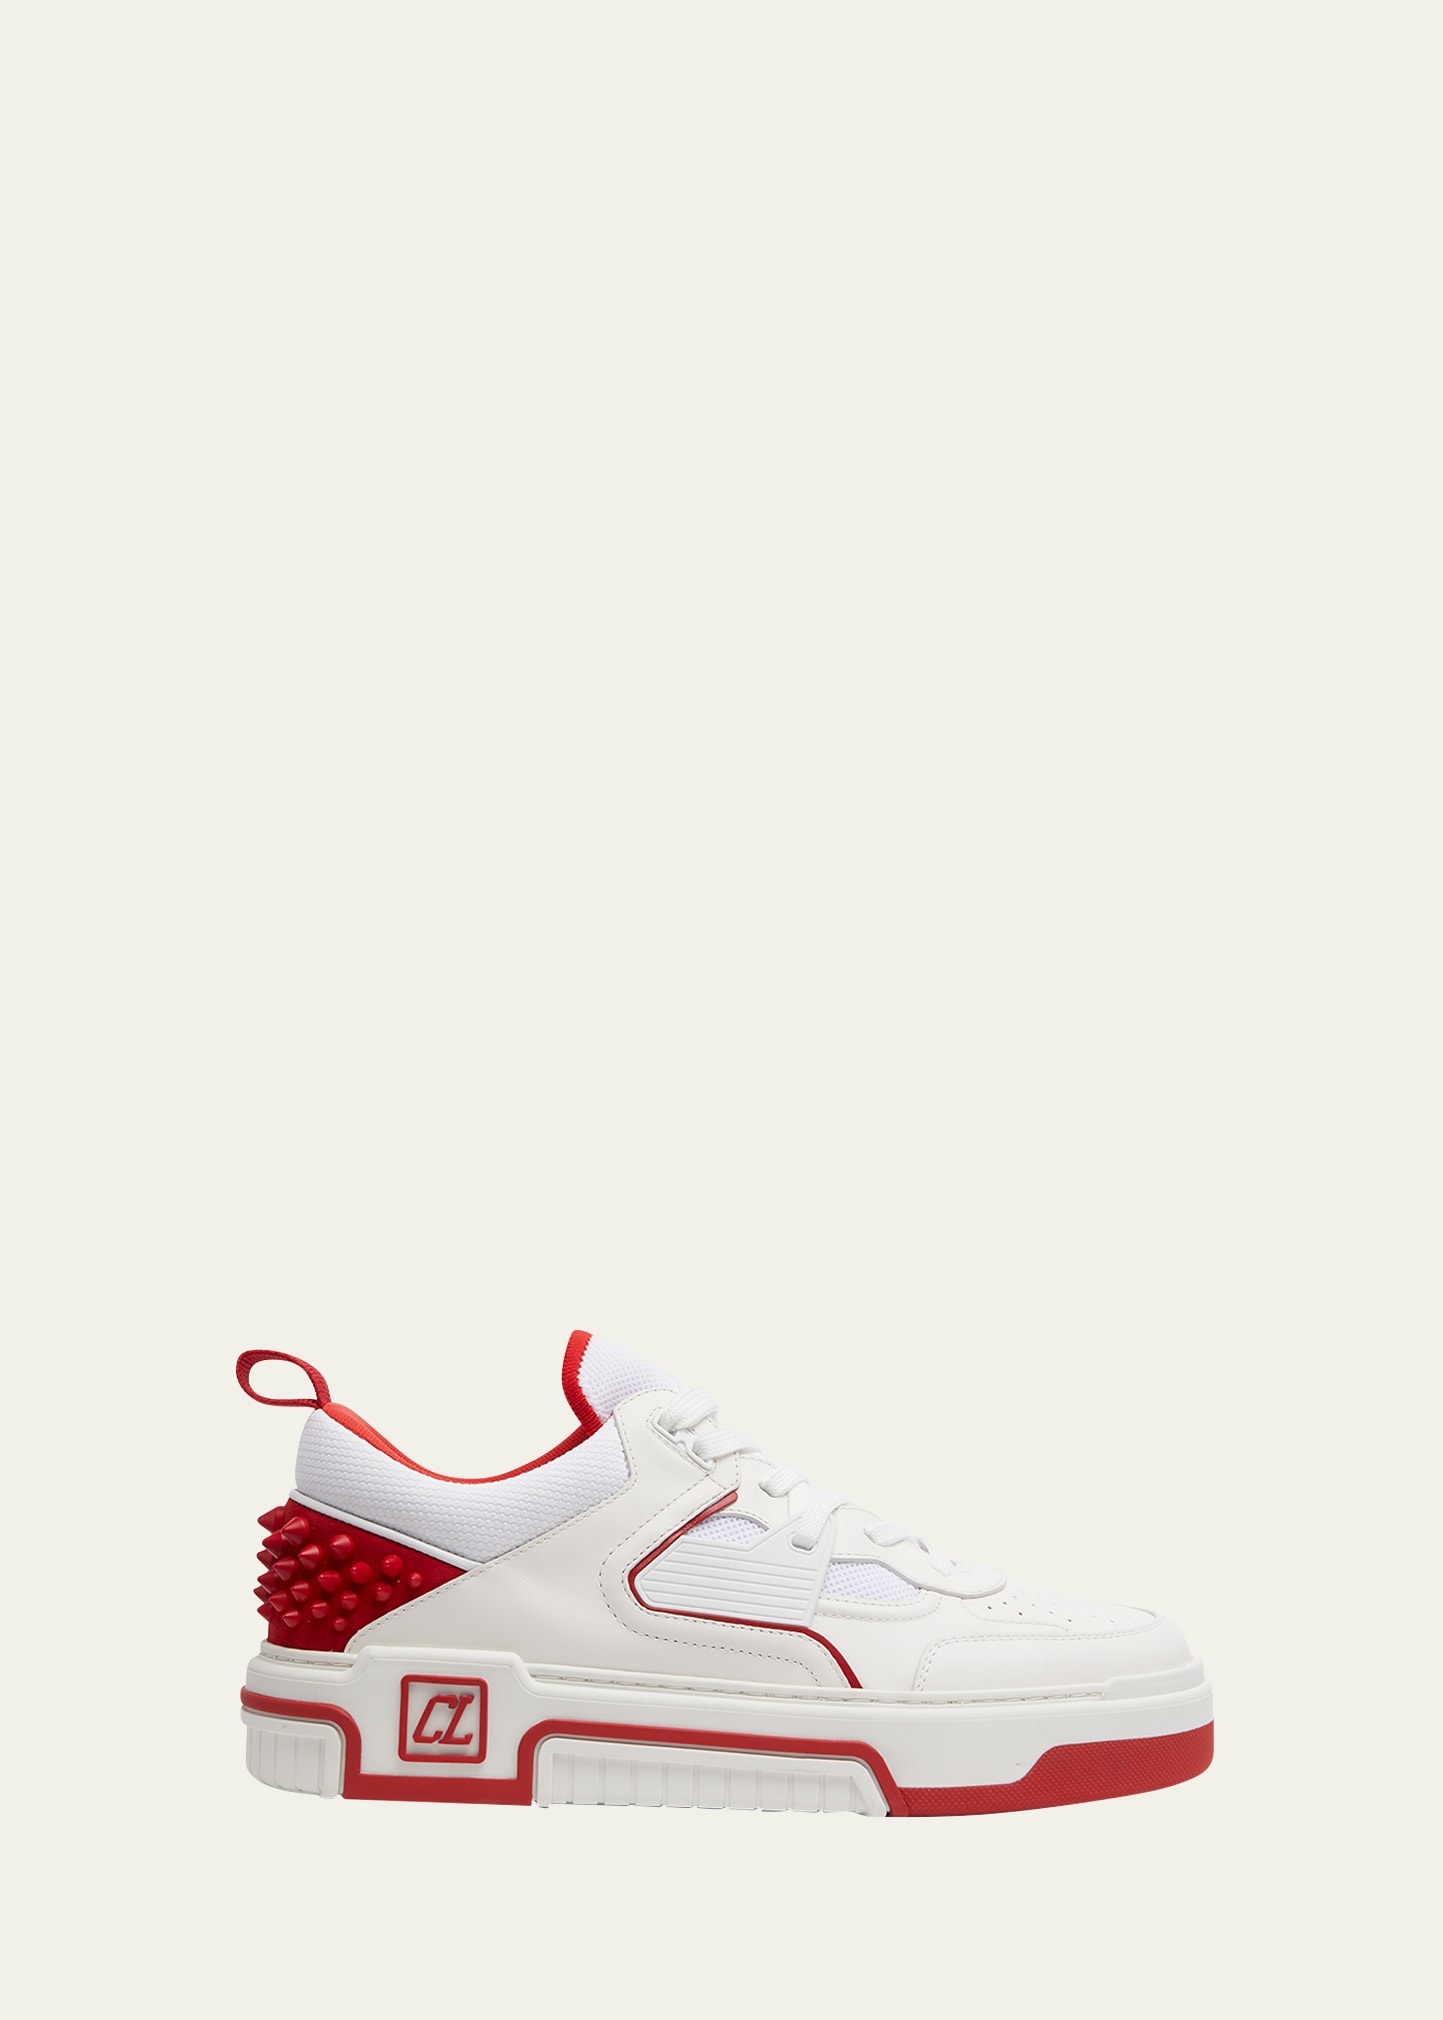 Shop Christian Louboutin Men's Astroloubi Mesh And Leather Low-top Sneakers In White/red